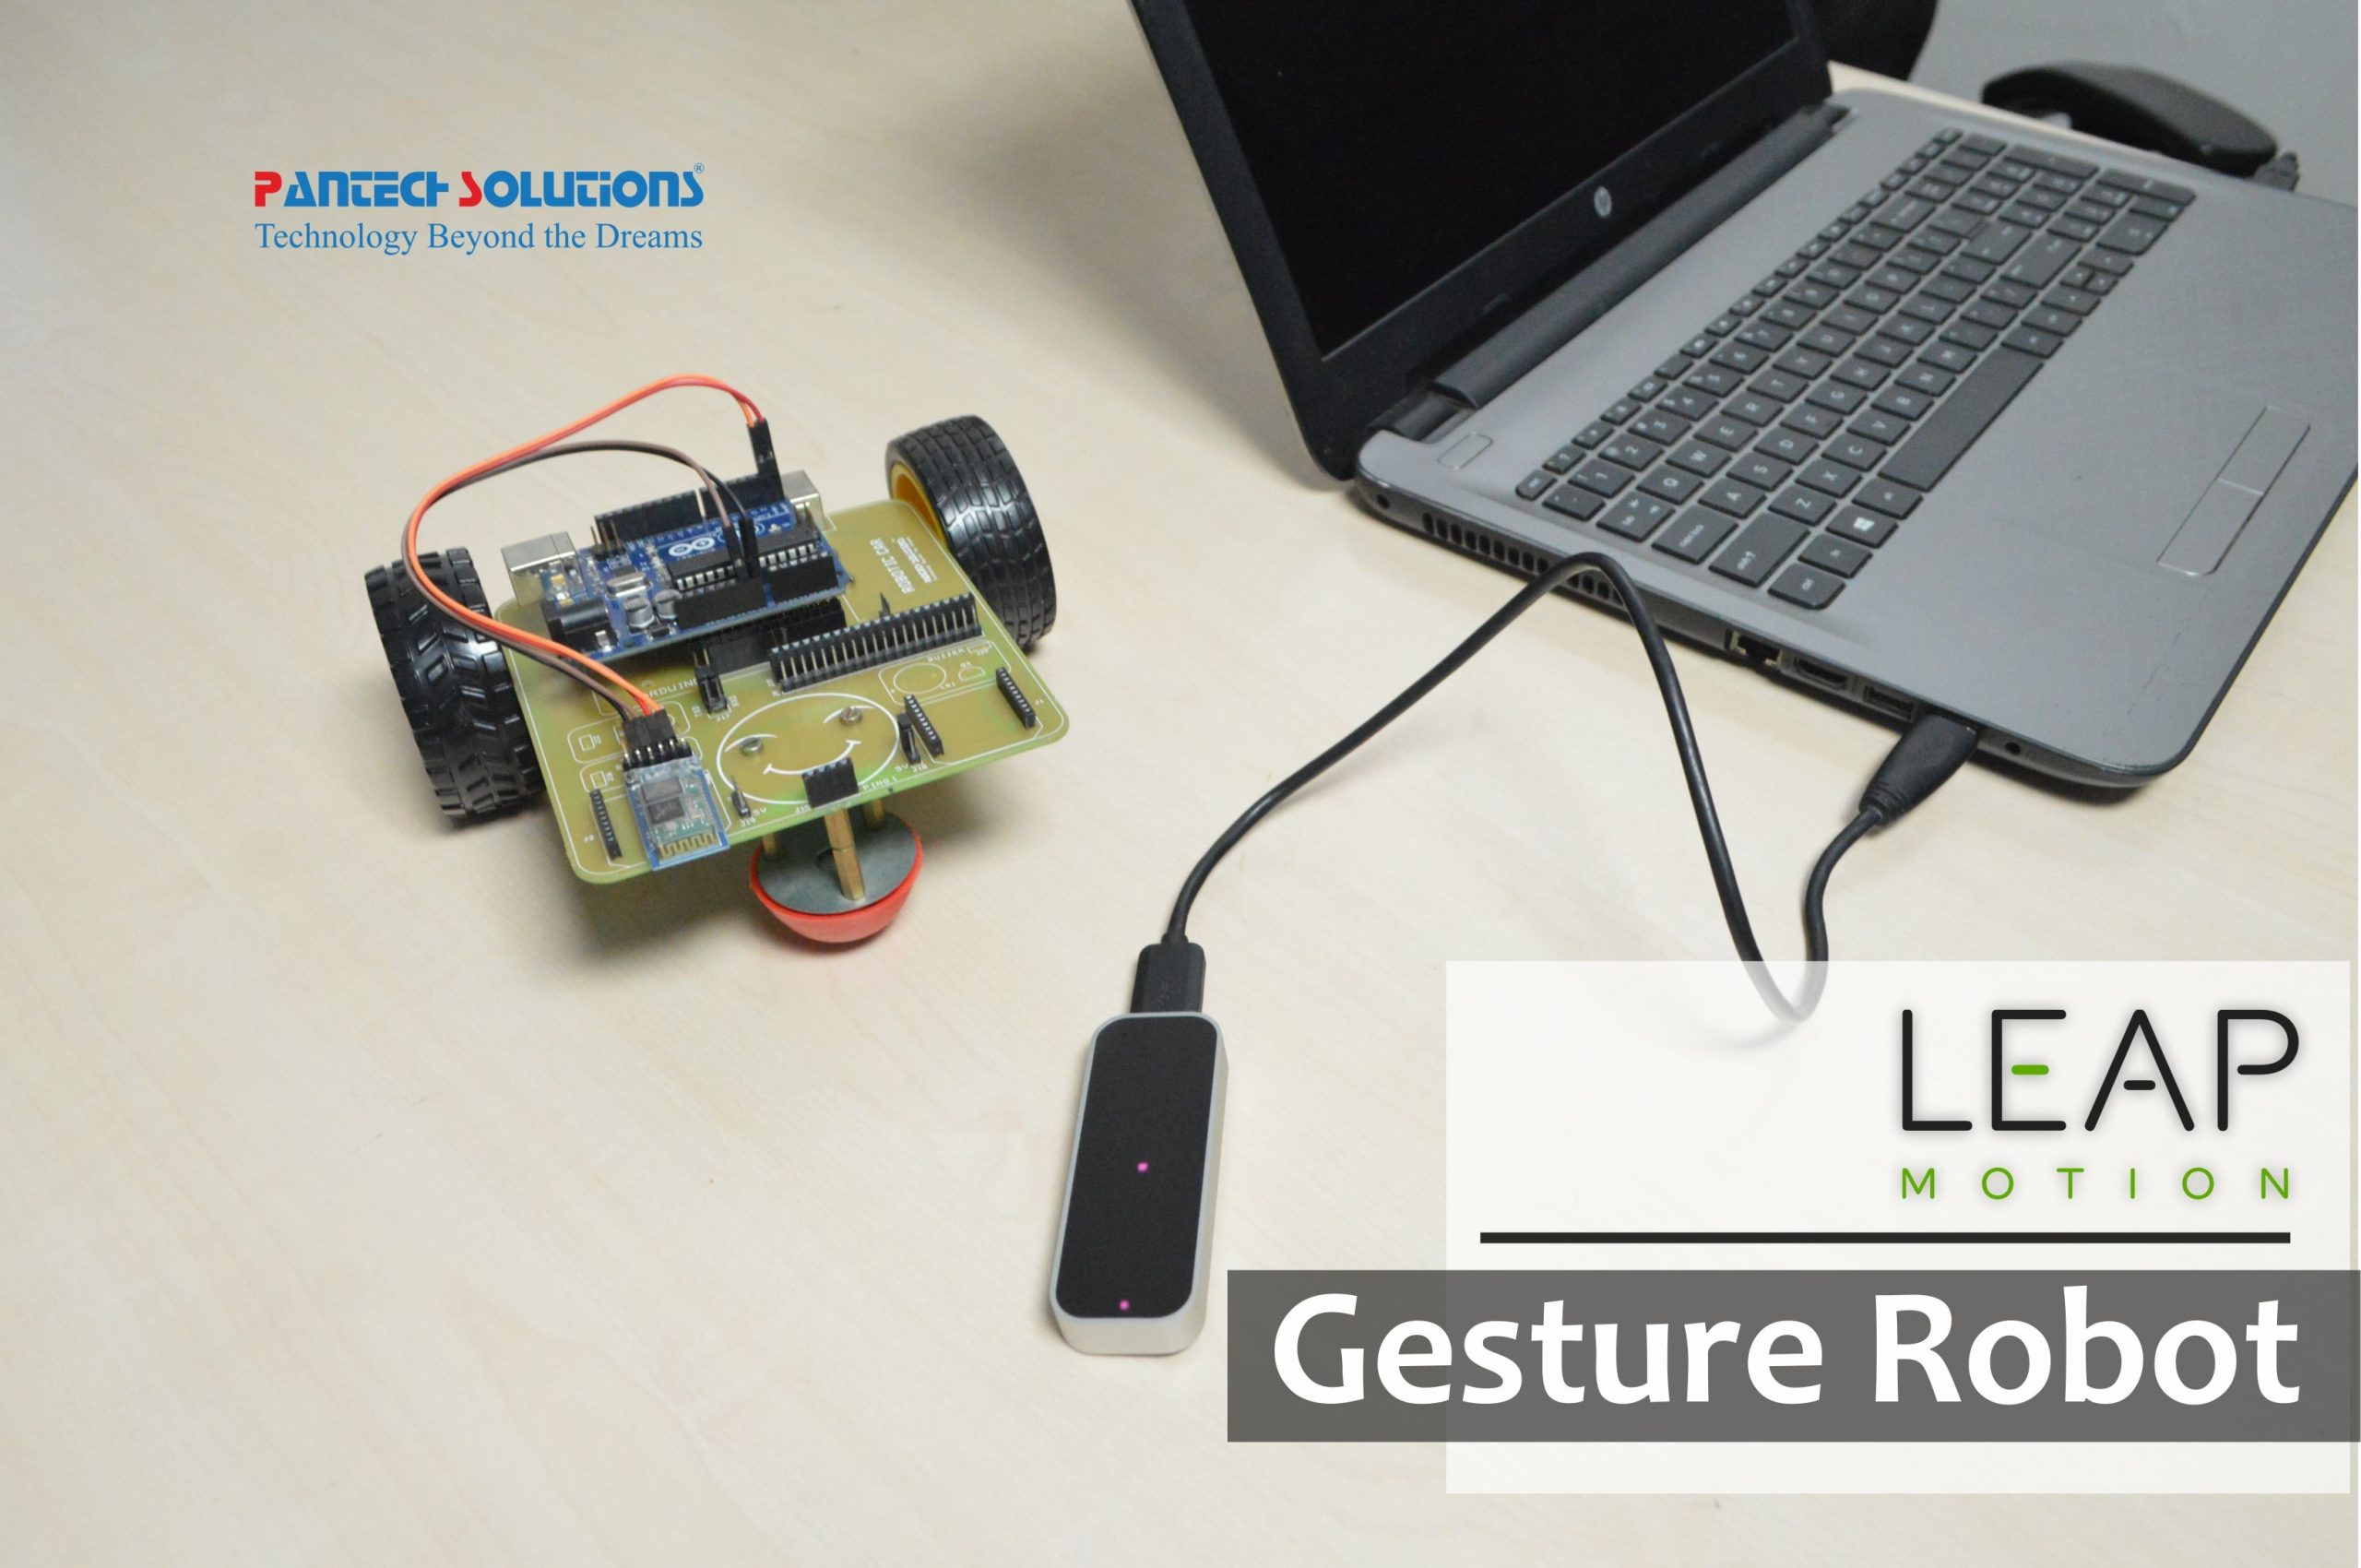 Leap Motion Controlled Arduino Robot